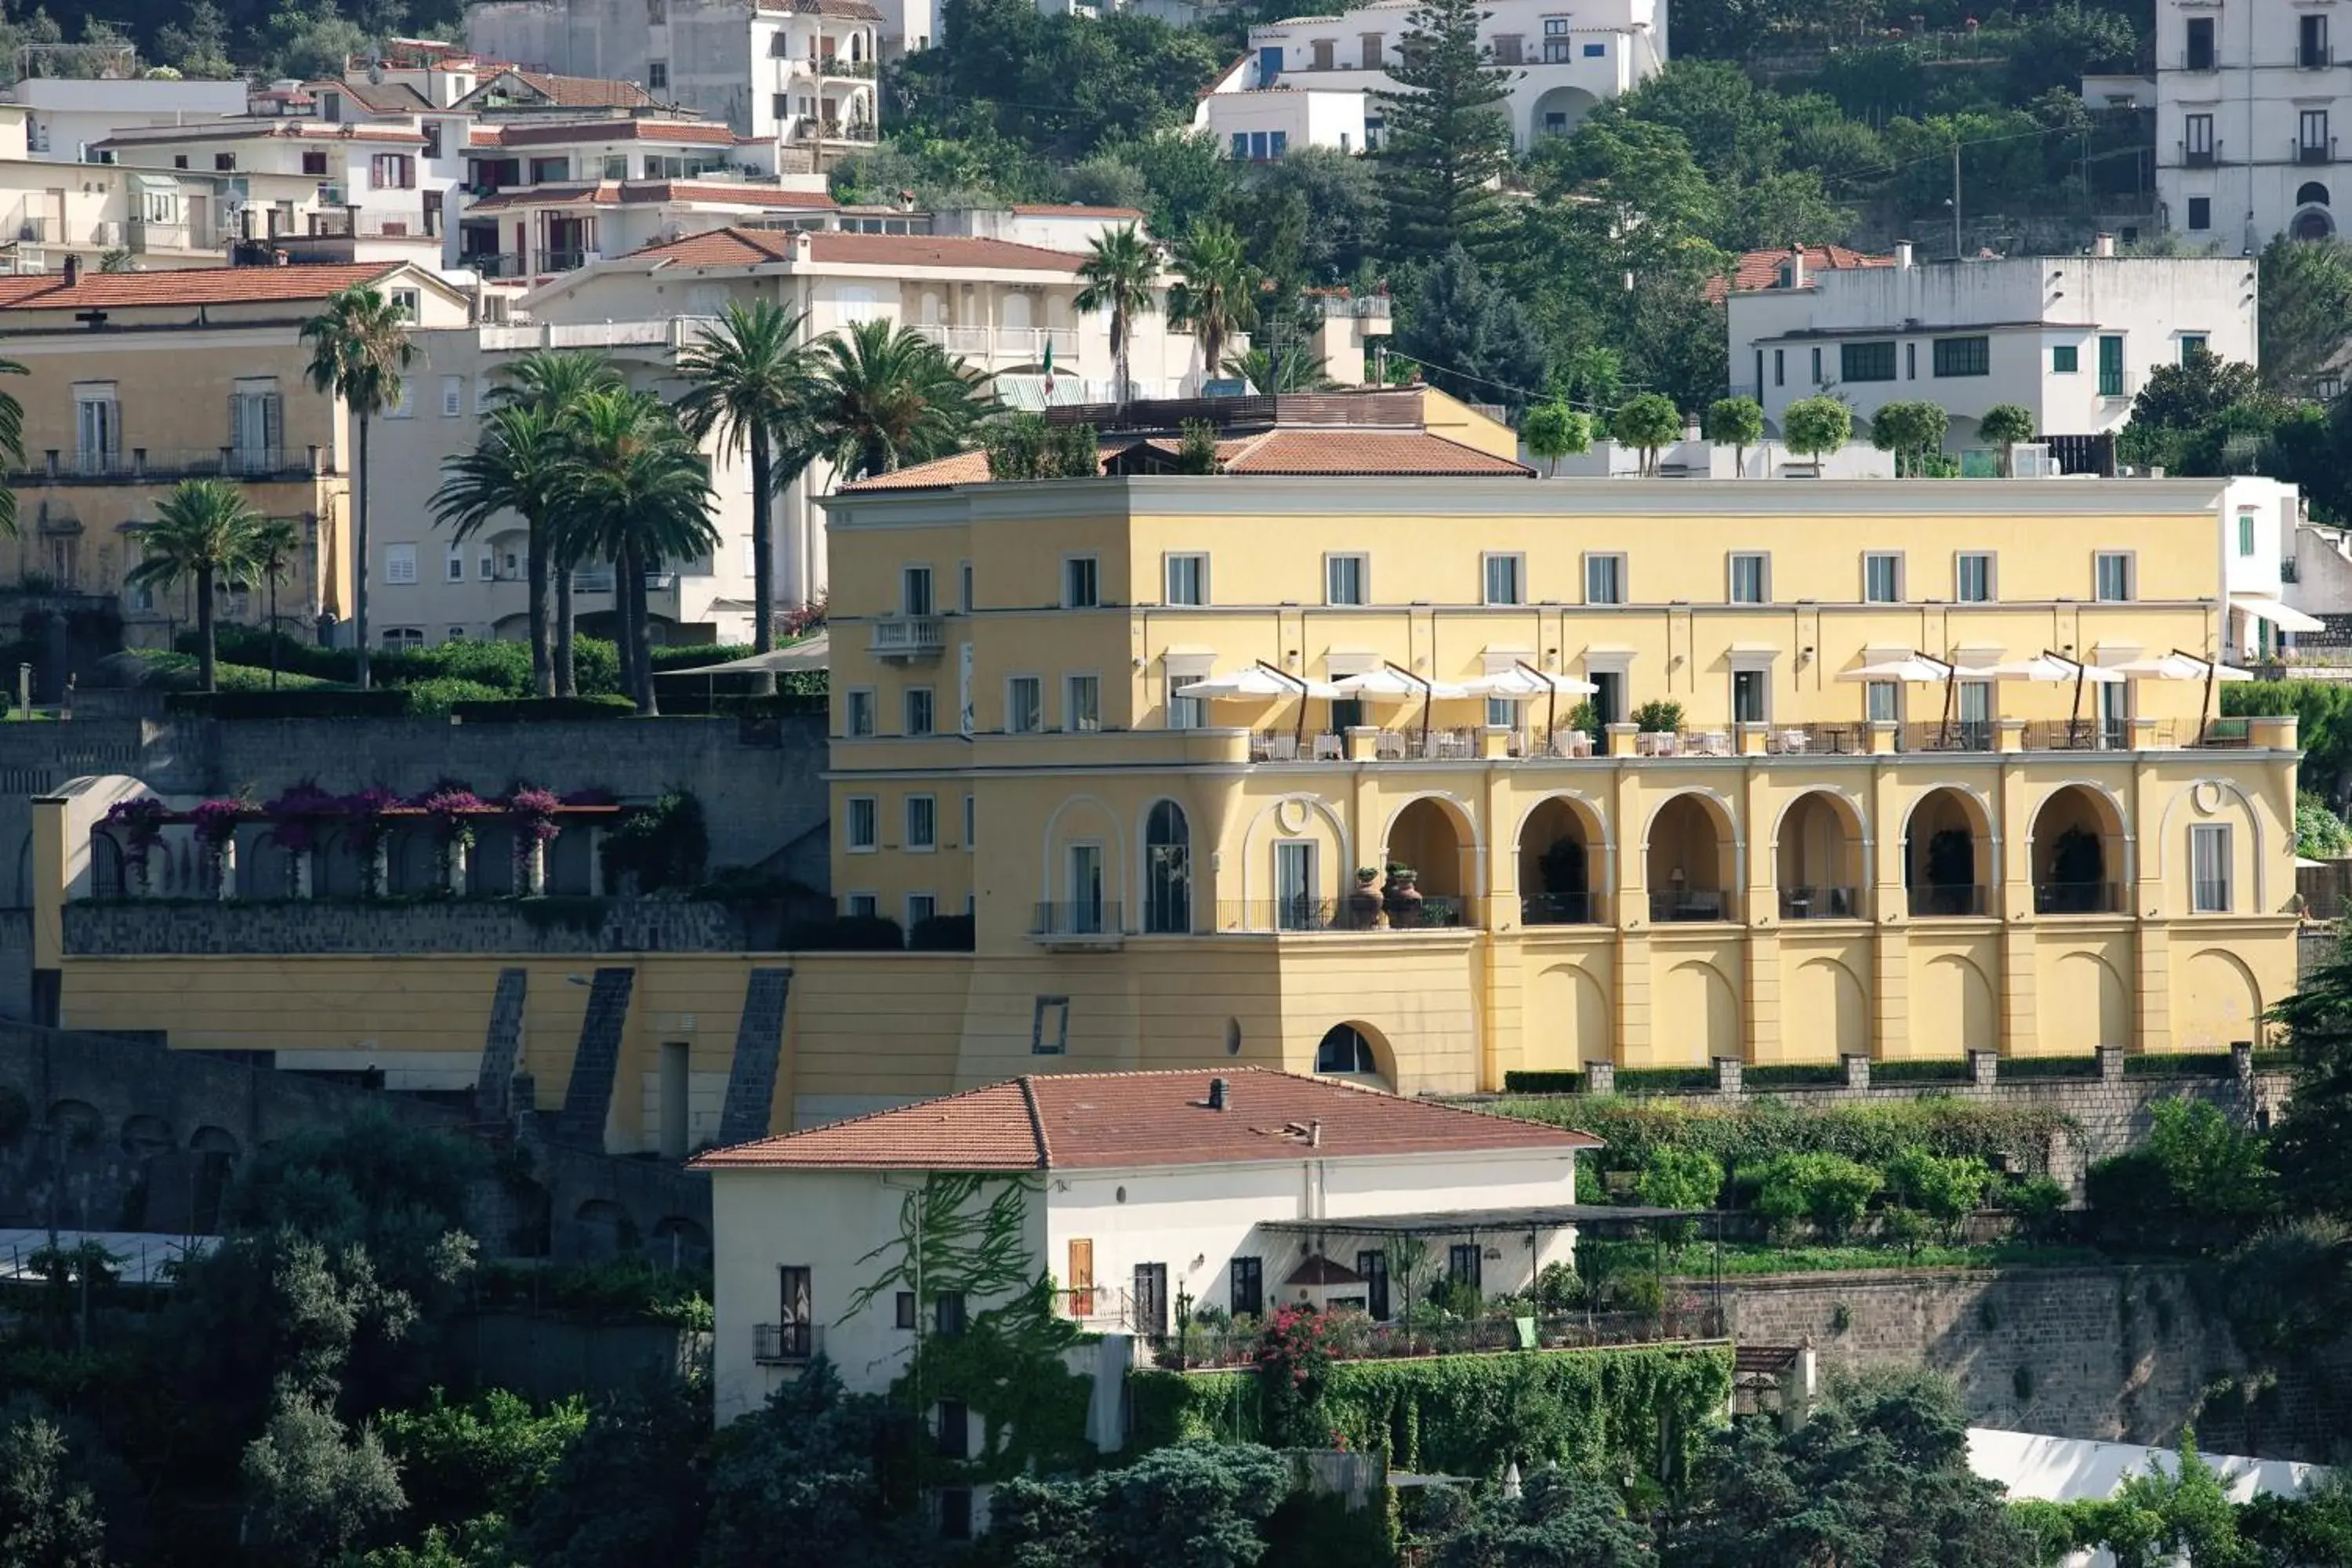 Bird's eye view, Property Building in Grand Hotel Angiolieri